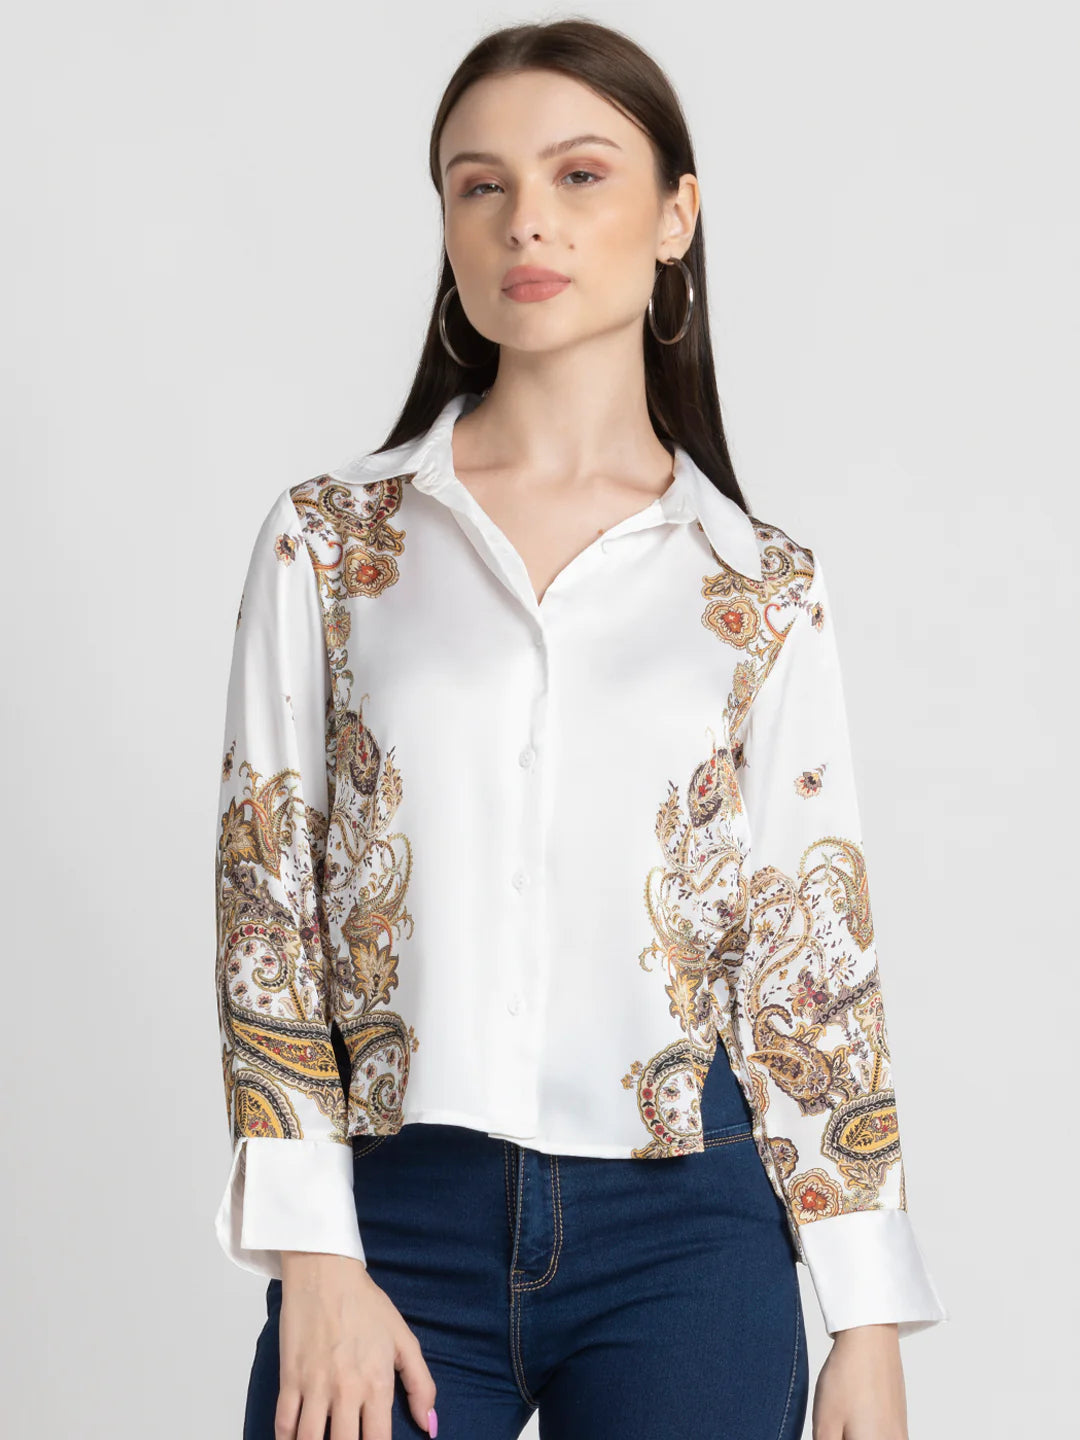 White Party Shirt for Women | Paisley Elegance Party Shirt